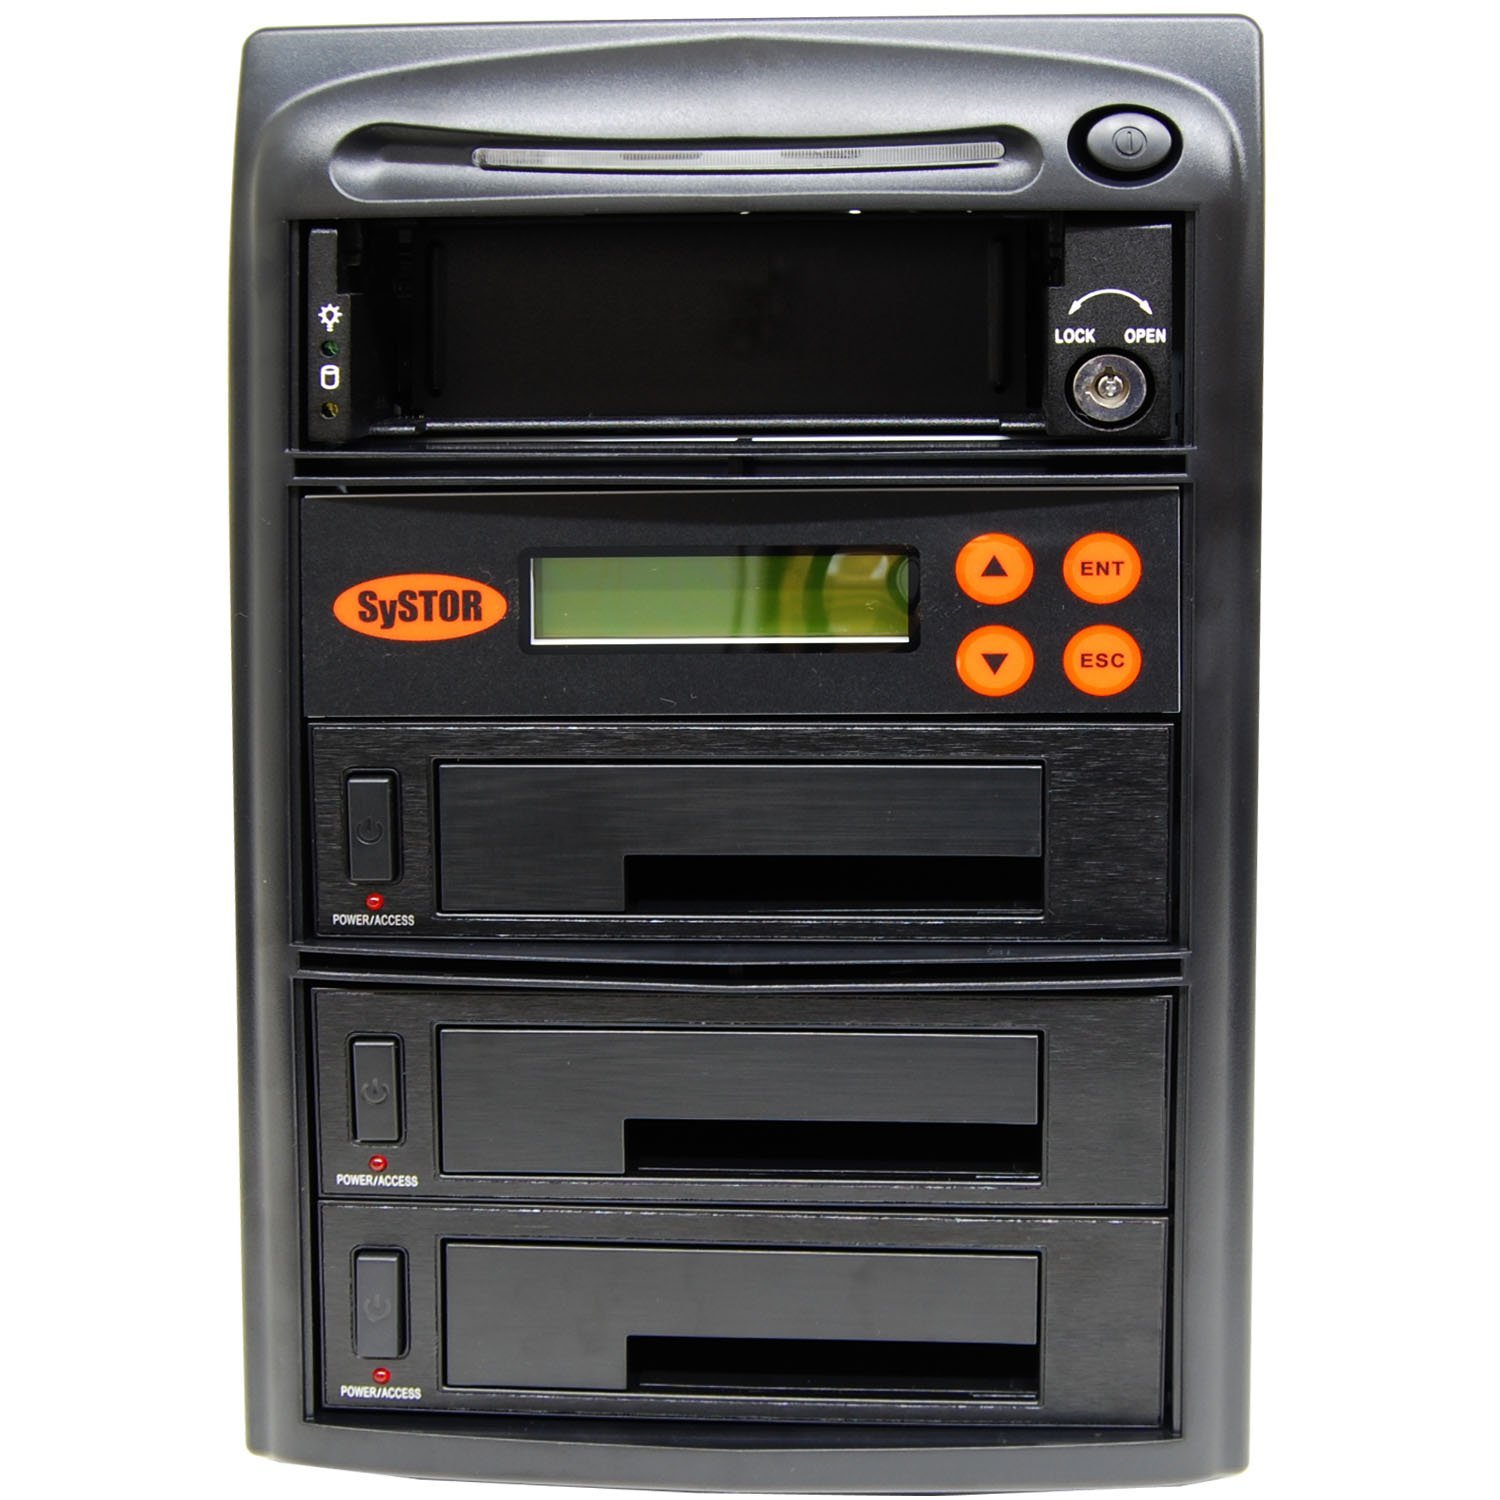 Systor 1:3 SATA/IDE Combo Hard Disk Drive (HDD/SSD) Duplicator/Sanitizer - High Speed (120mb/sec) SYS503HS